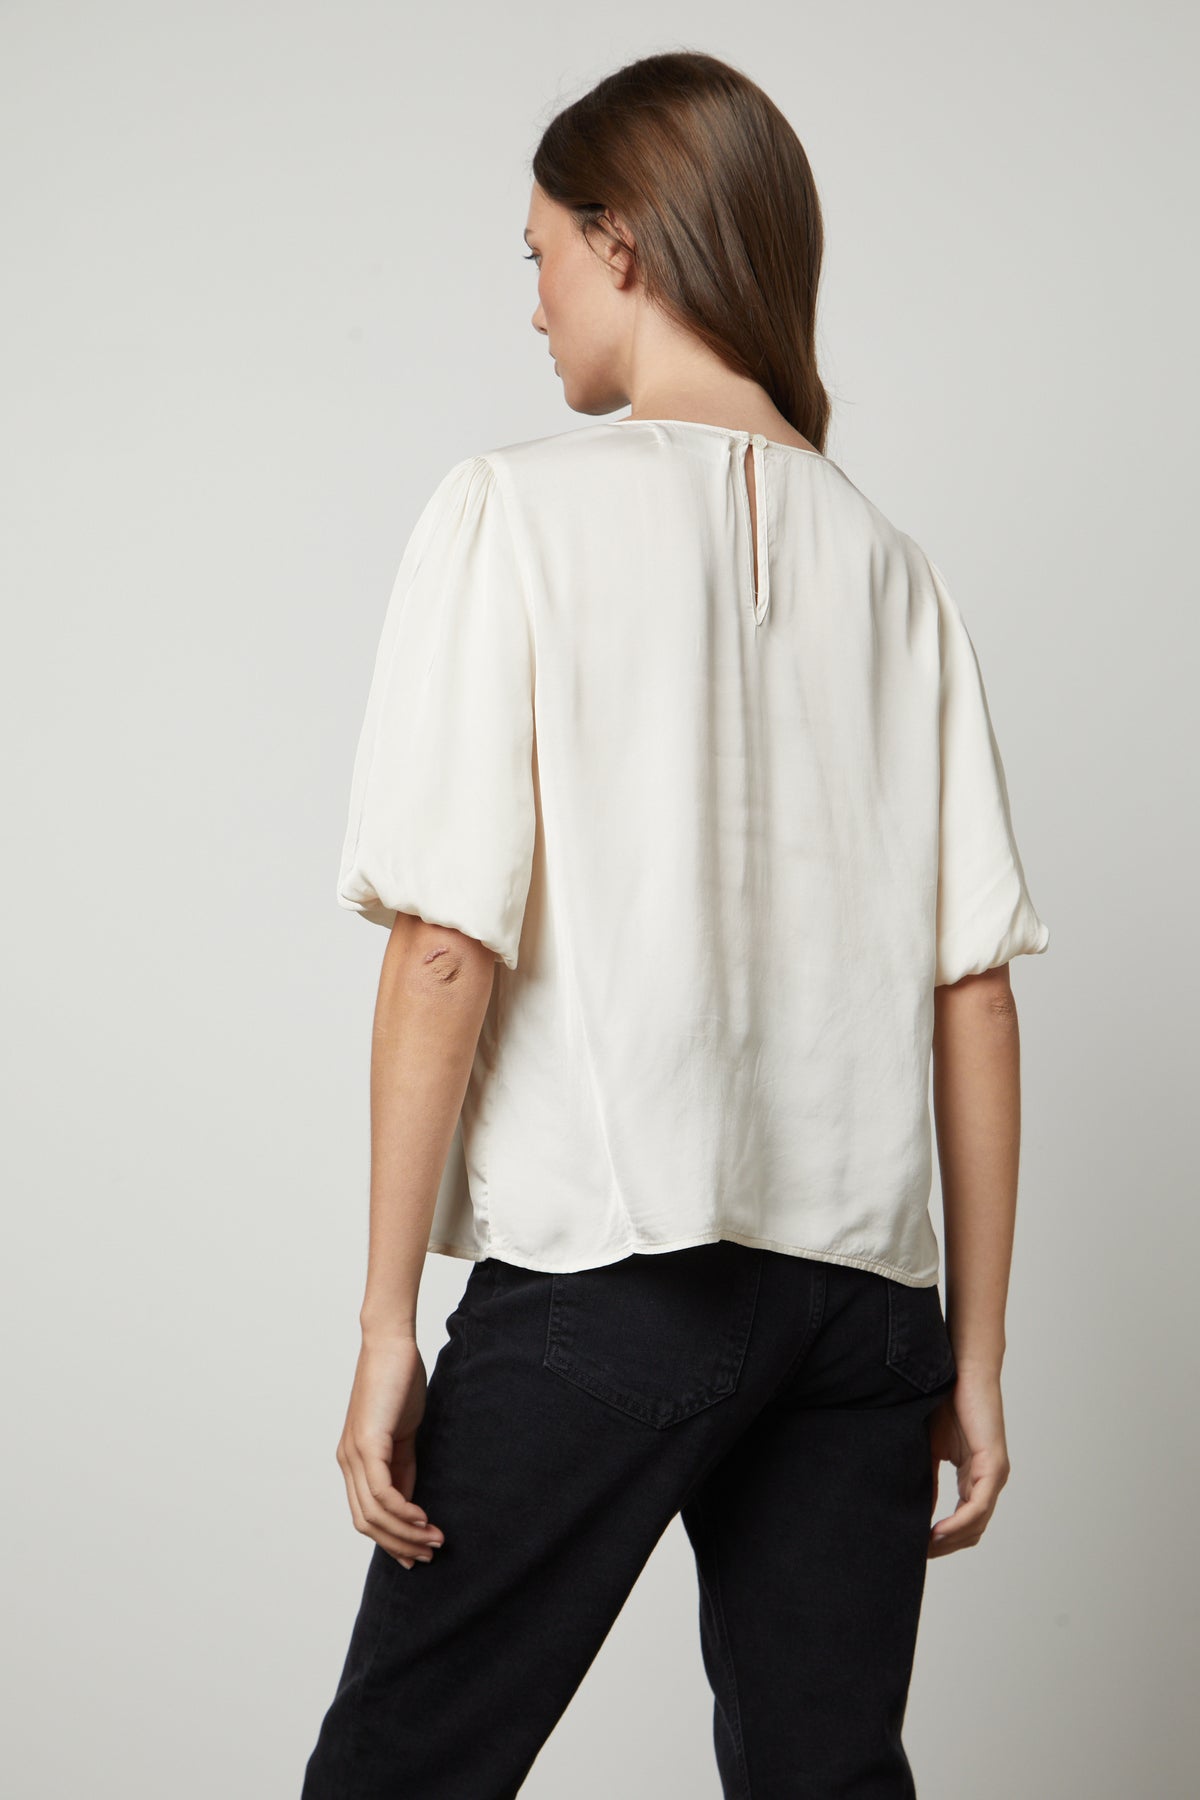 The back view of a woman wearing a DESI SATIN PUFF SLEEVE TOP blouse by Velvet by Graham & Spencer.-35656169619649